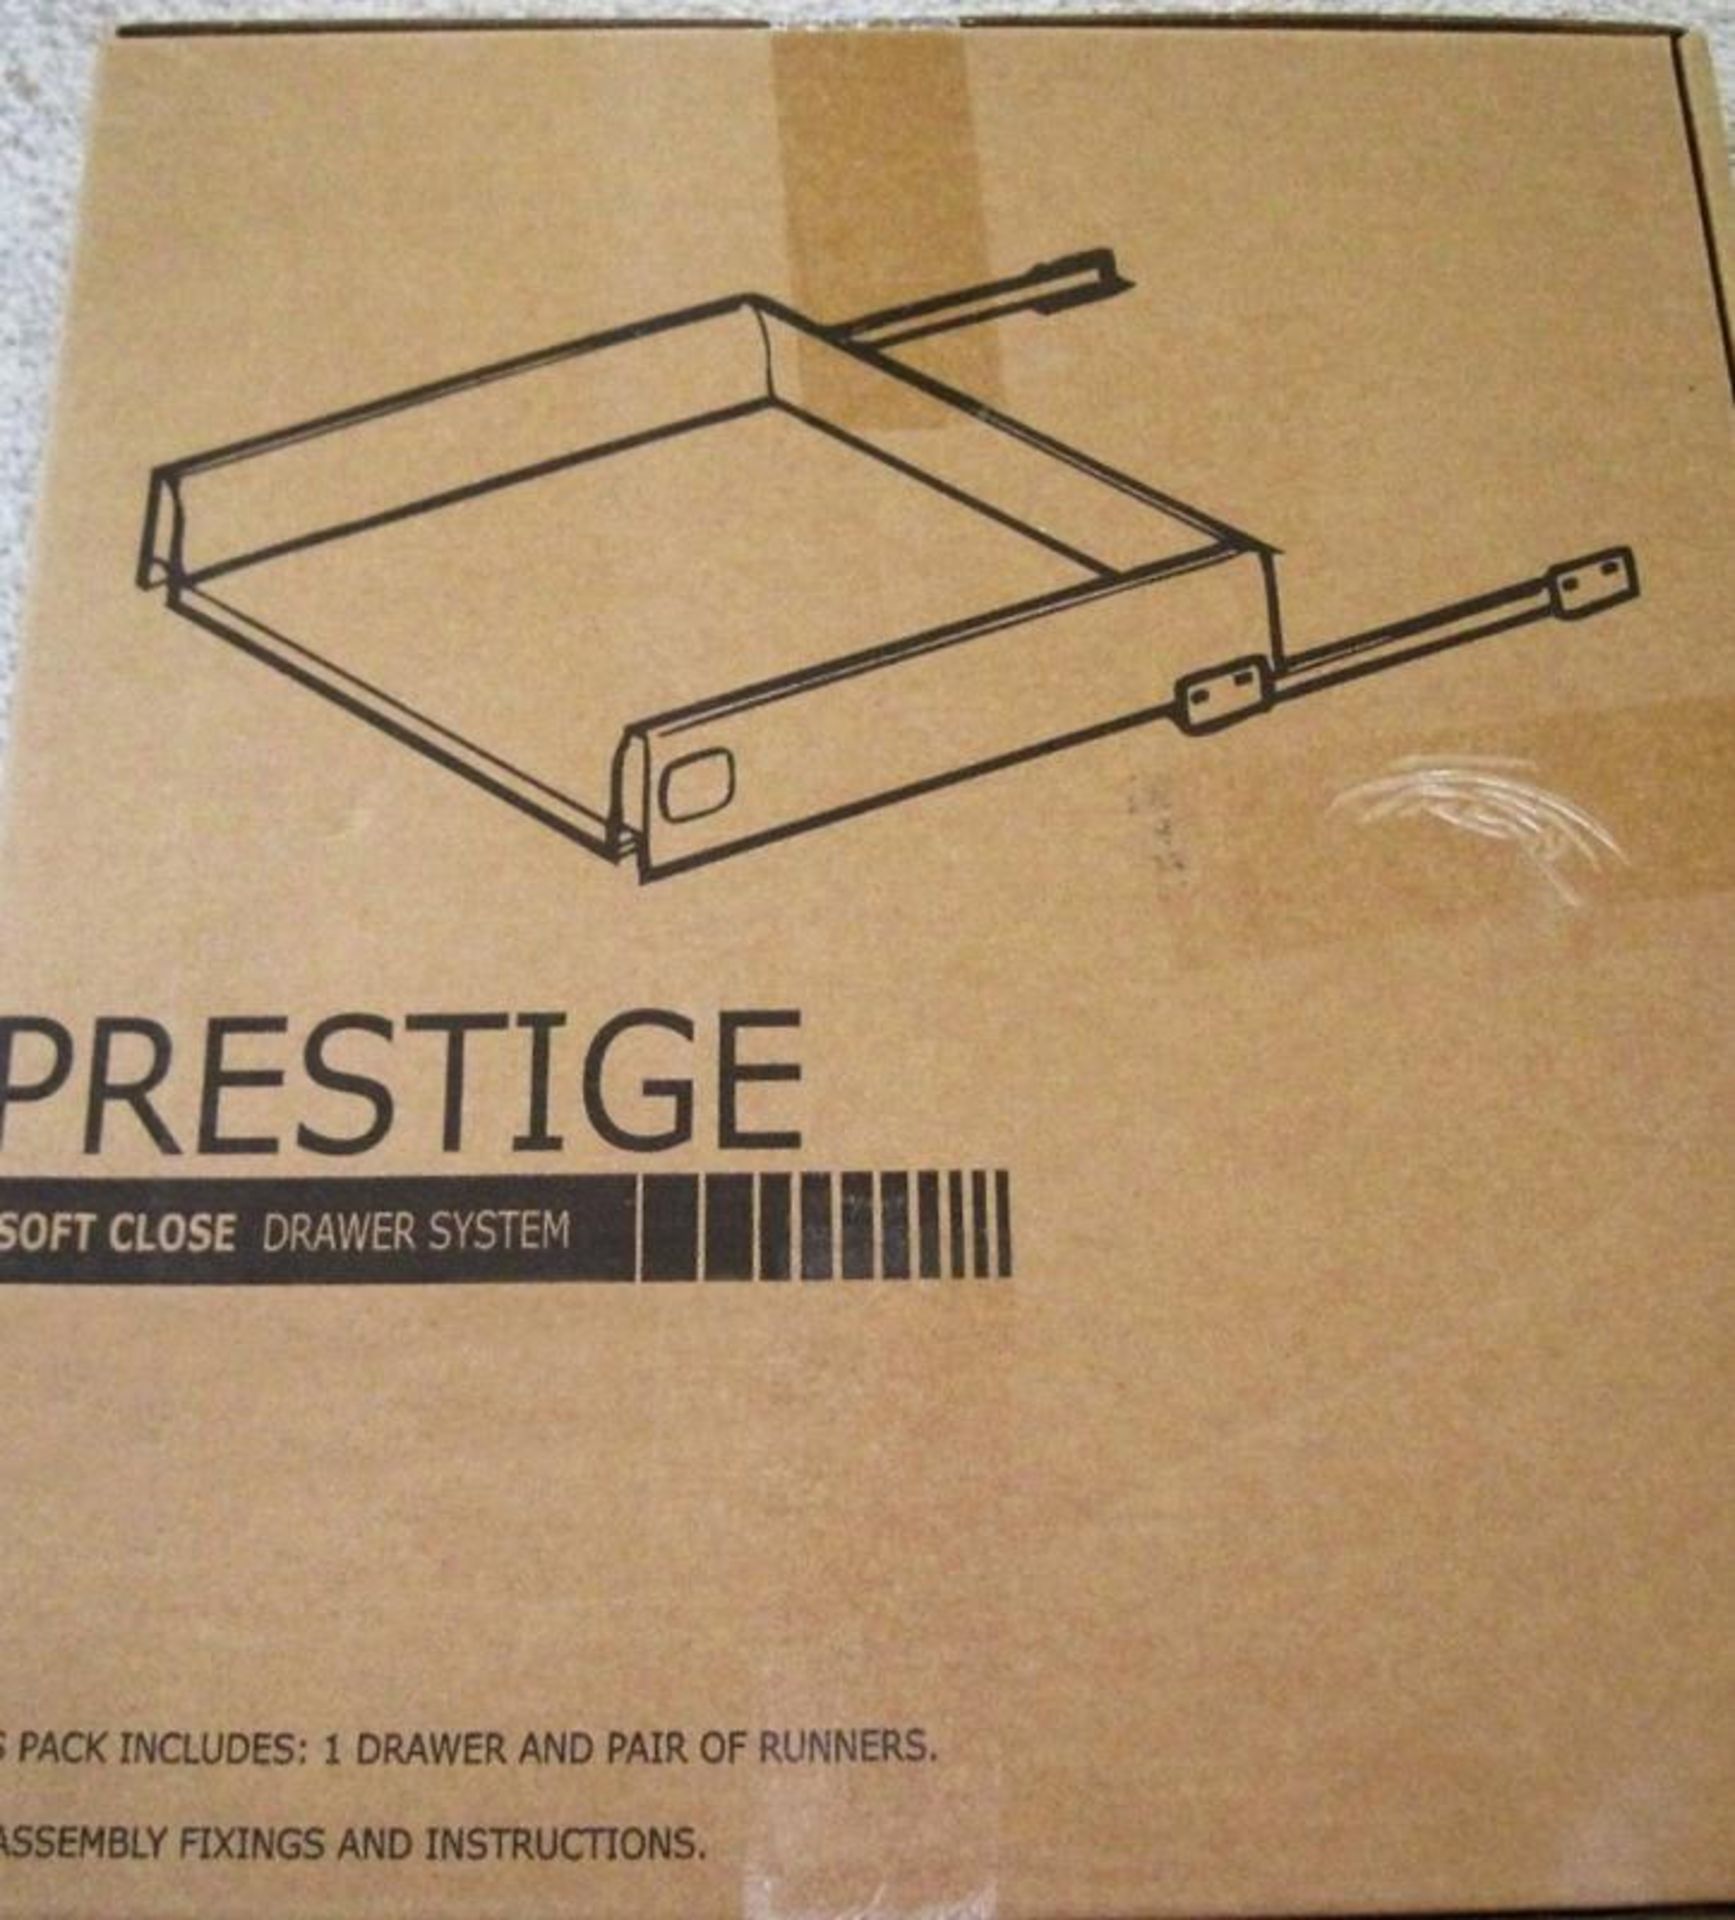 4 x 300mm Soft Close Kitchen Drawer Packs - B&Q Prestige - Brand New Stock - Features Include - Image 2 of 2